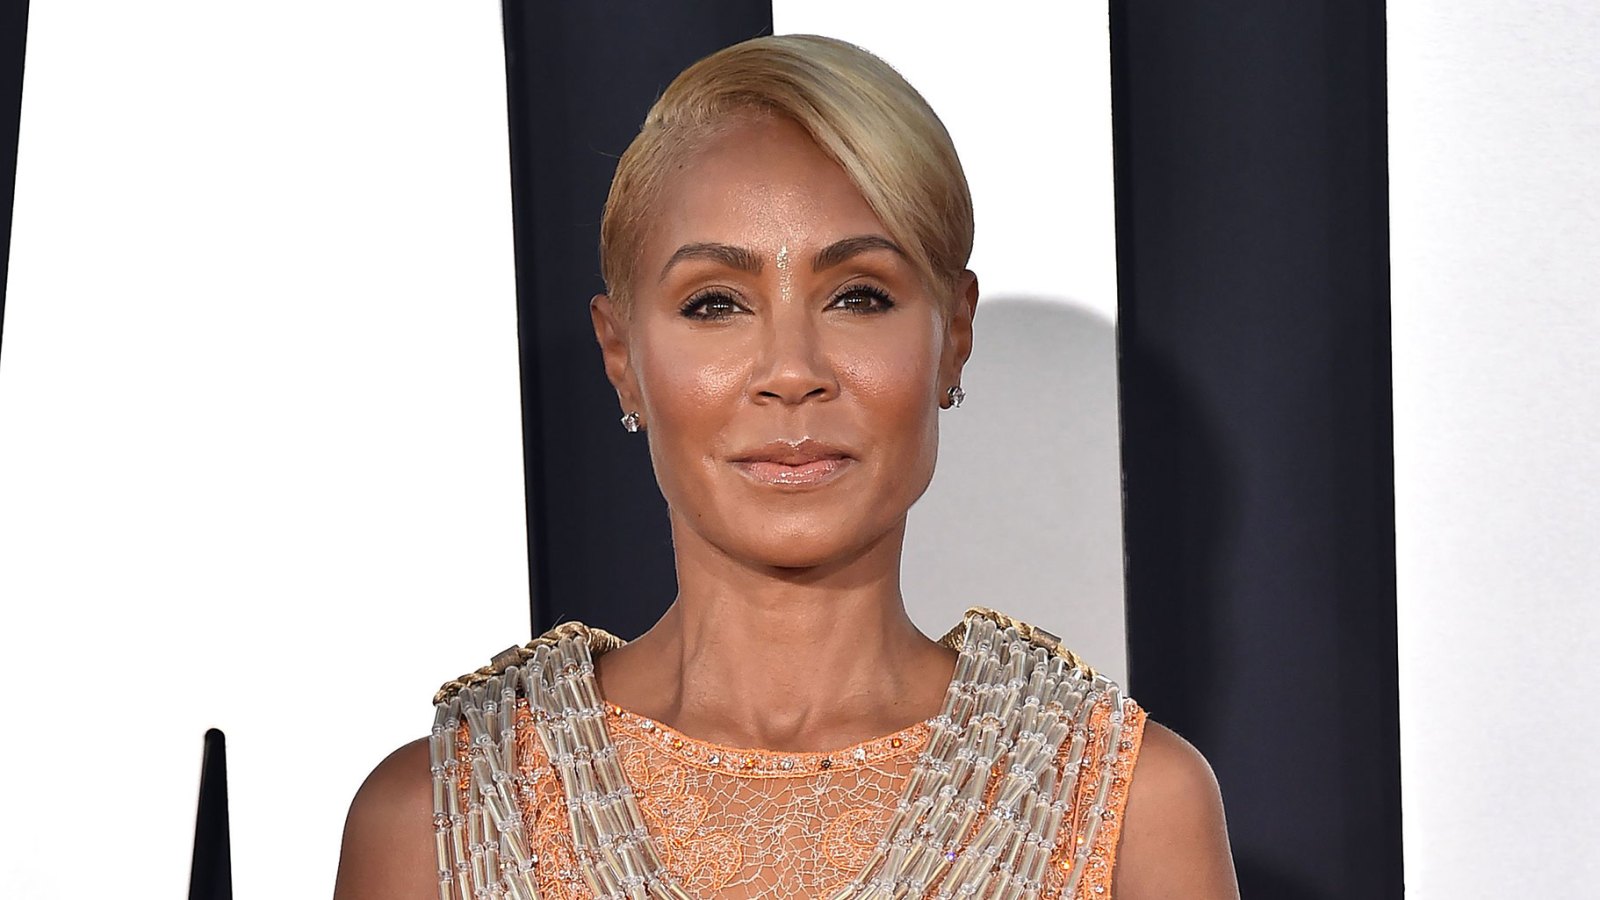 Jada Pinkett Smith opens up about her fight with alopecia, owns up to losing hair and much more.